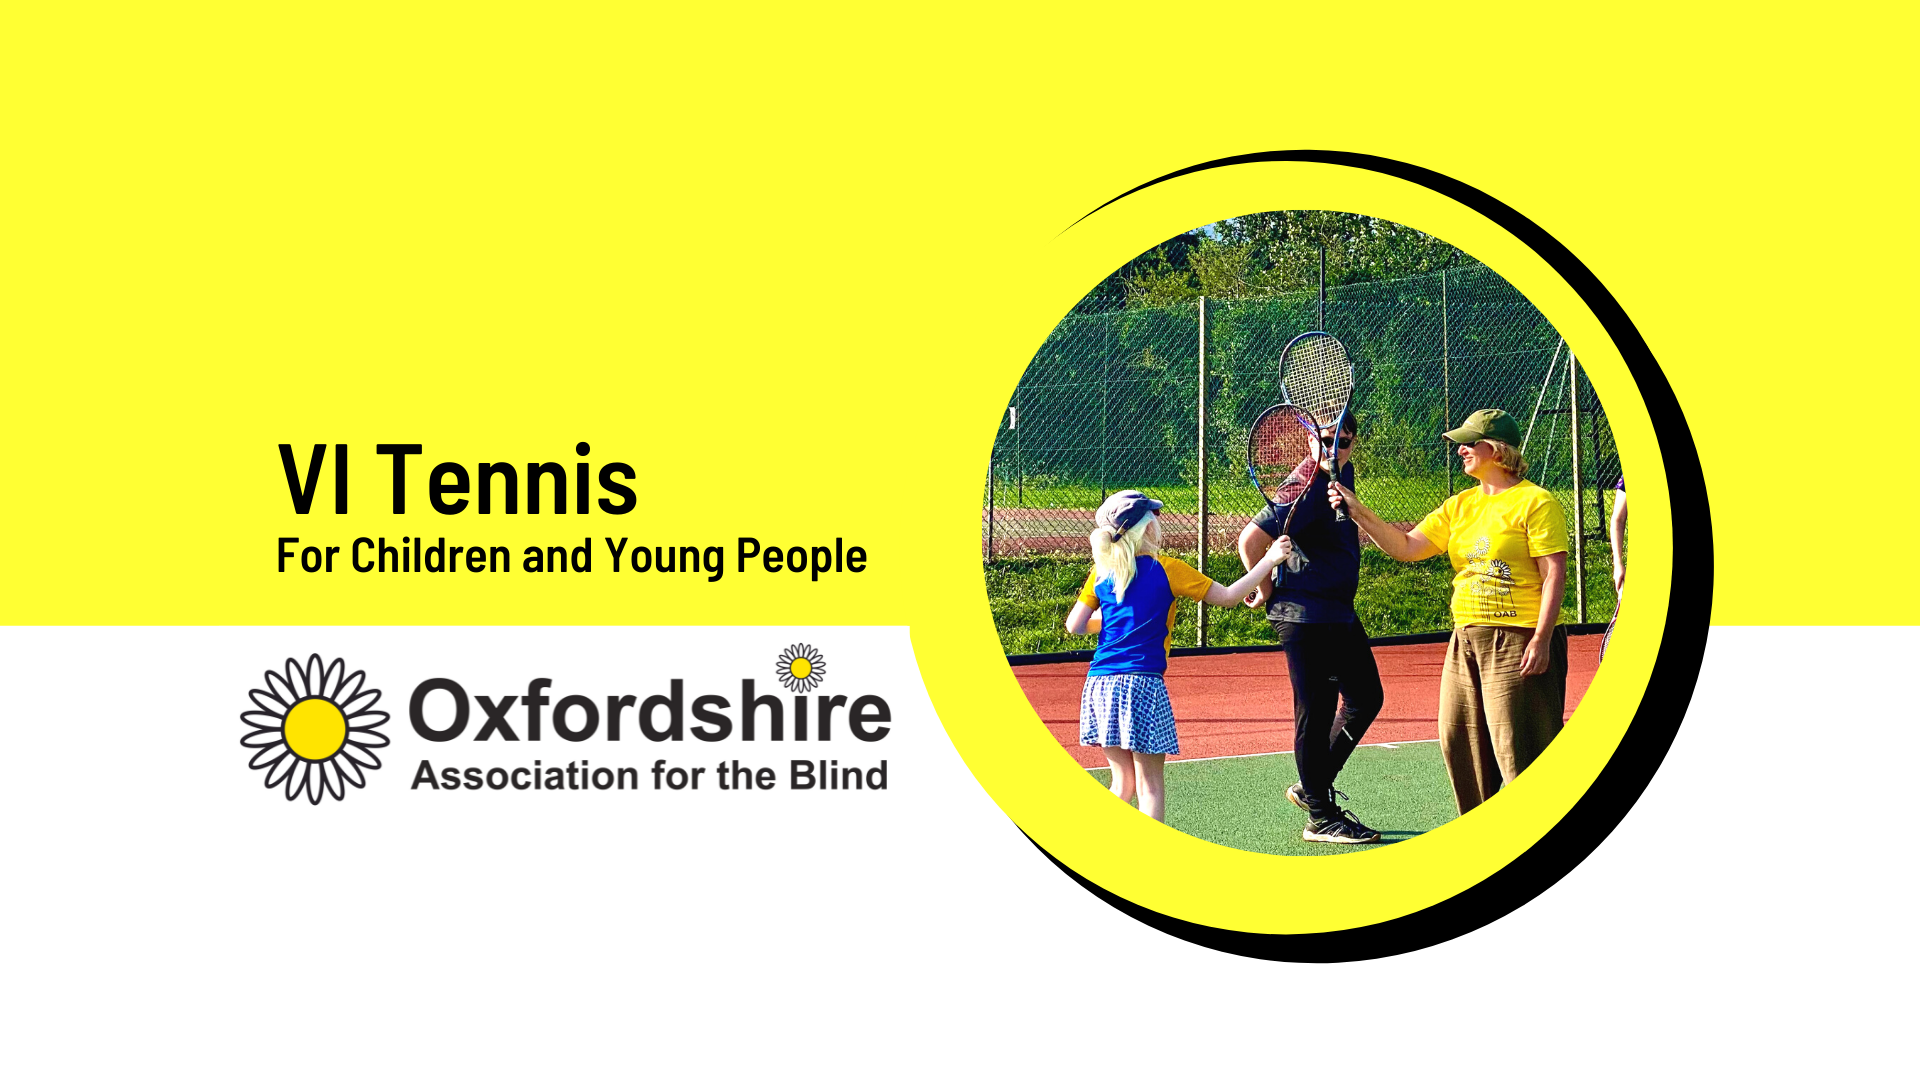 VI Tennis for Children and Young People